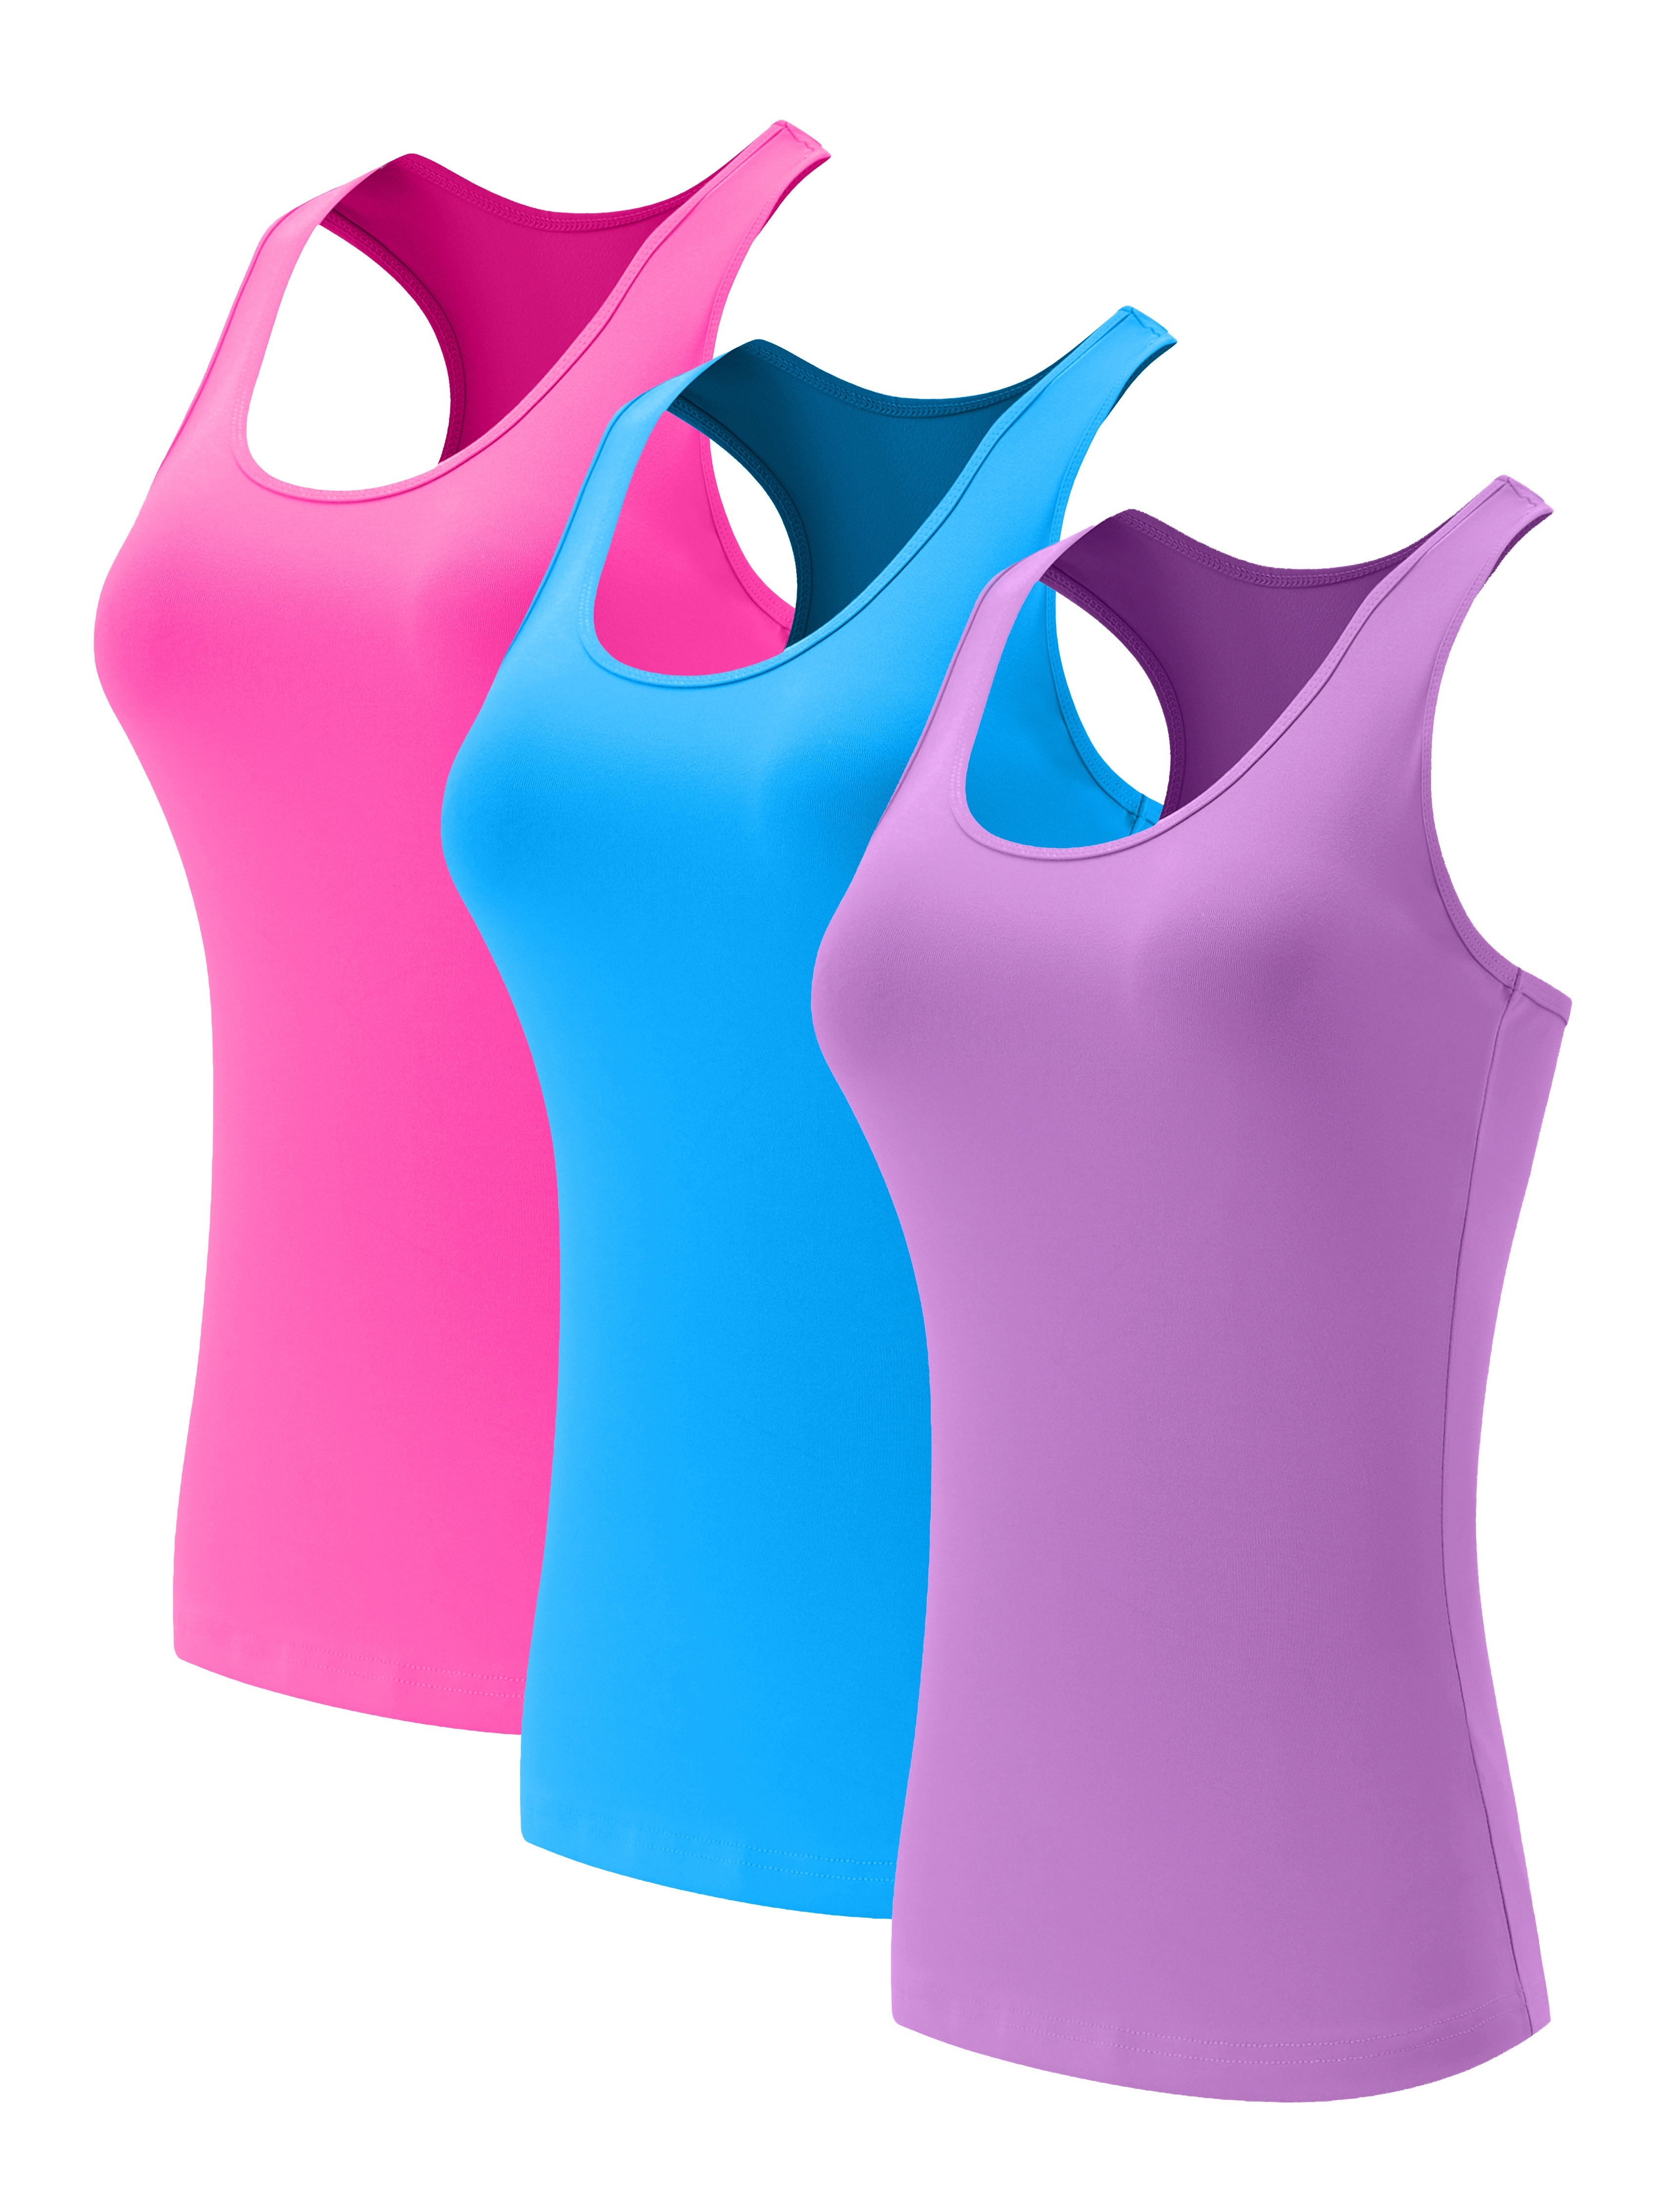 NELEUS Womens Compression Base Layer Dry Fit Tank Top 3 Pack,Blue+Green+Pink,US  Size XS 